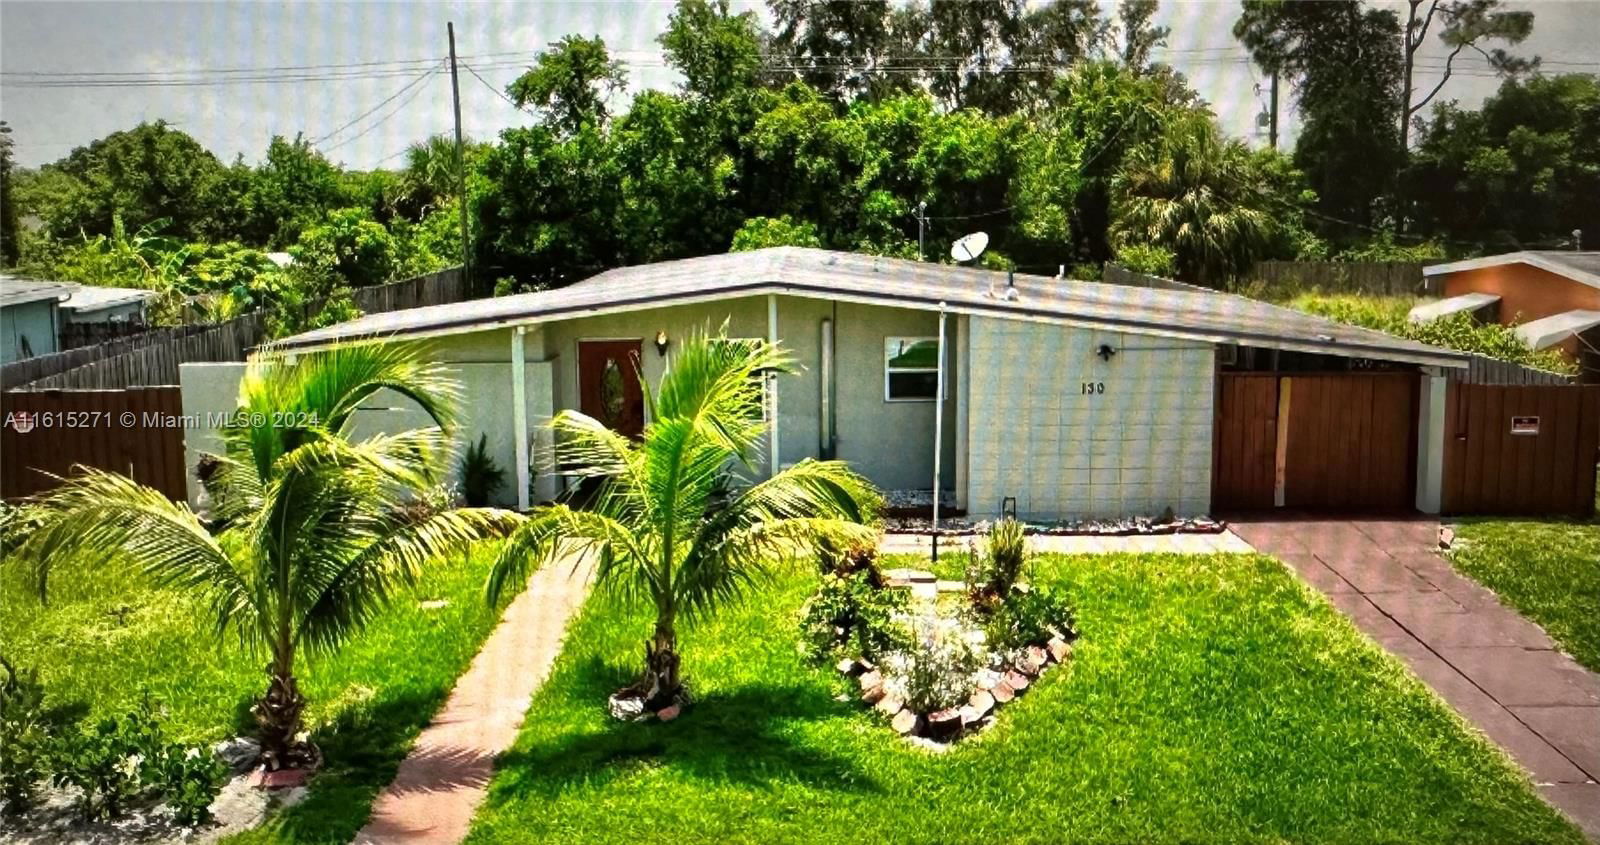 Real estate property located at 130 Banyan Dr, St Lucie County, RIVER PARK UNIT 3 TRACT E, Port St. Lucie, FL